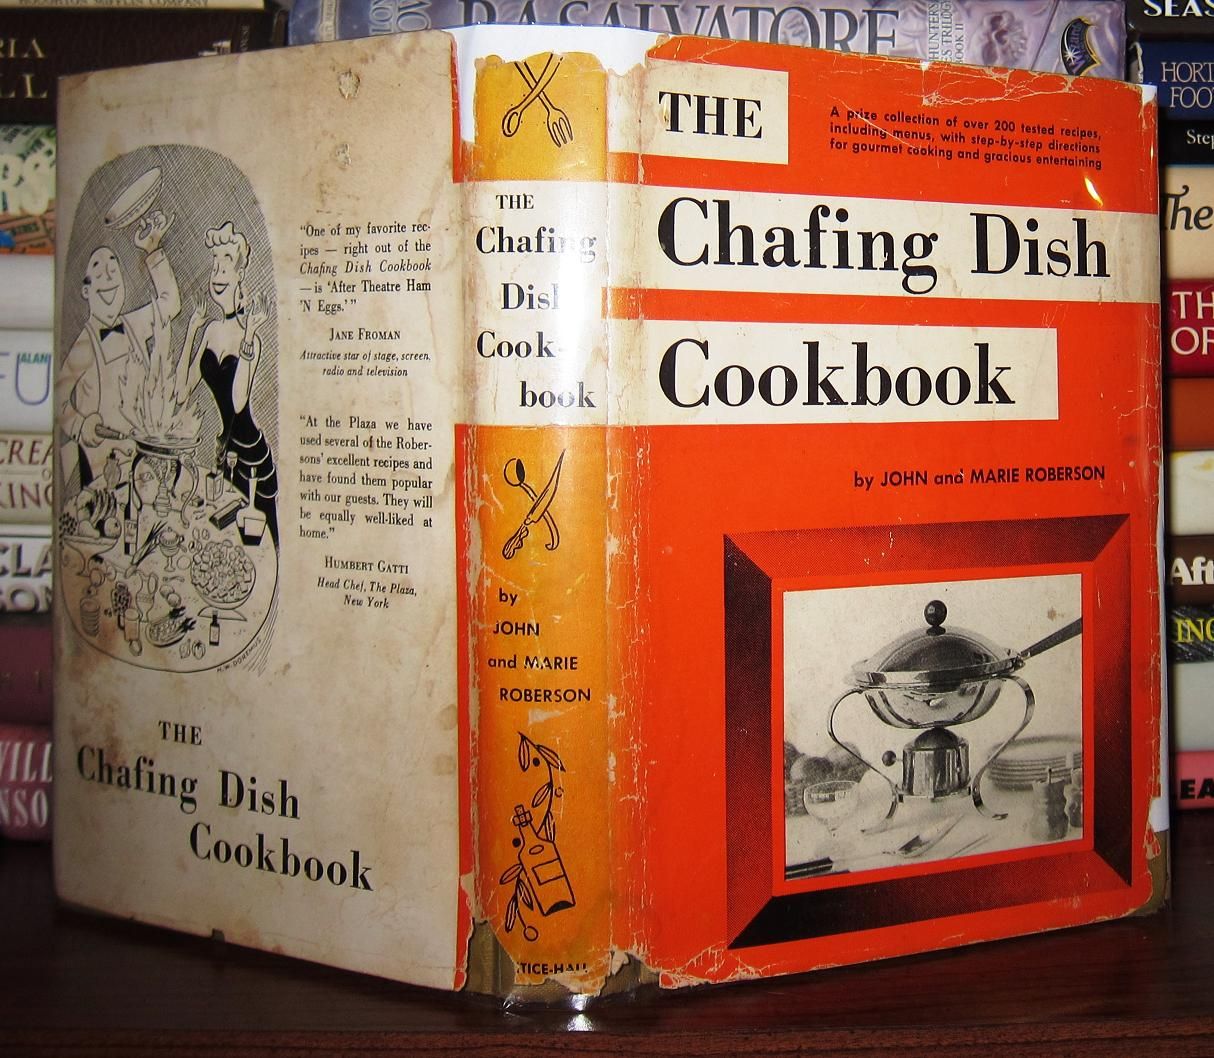 JOHN AND MARIE ROBERSON - The Chafing Dish Cookbook